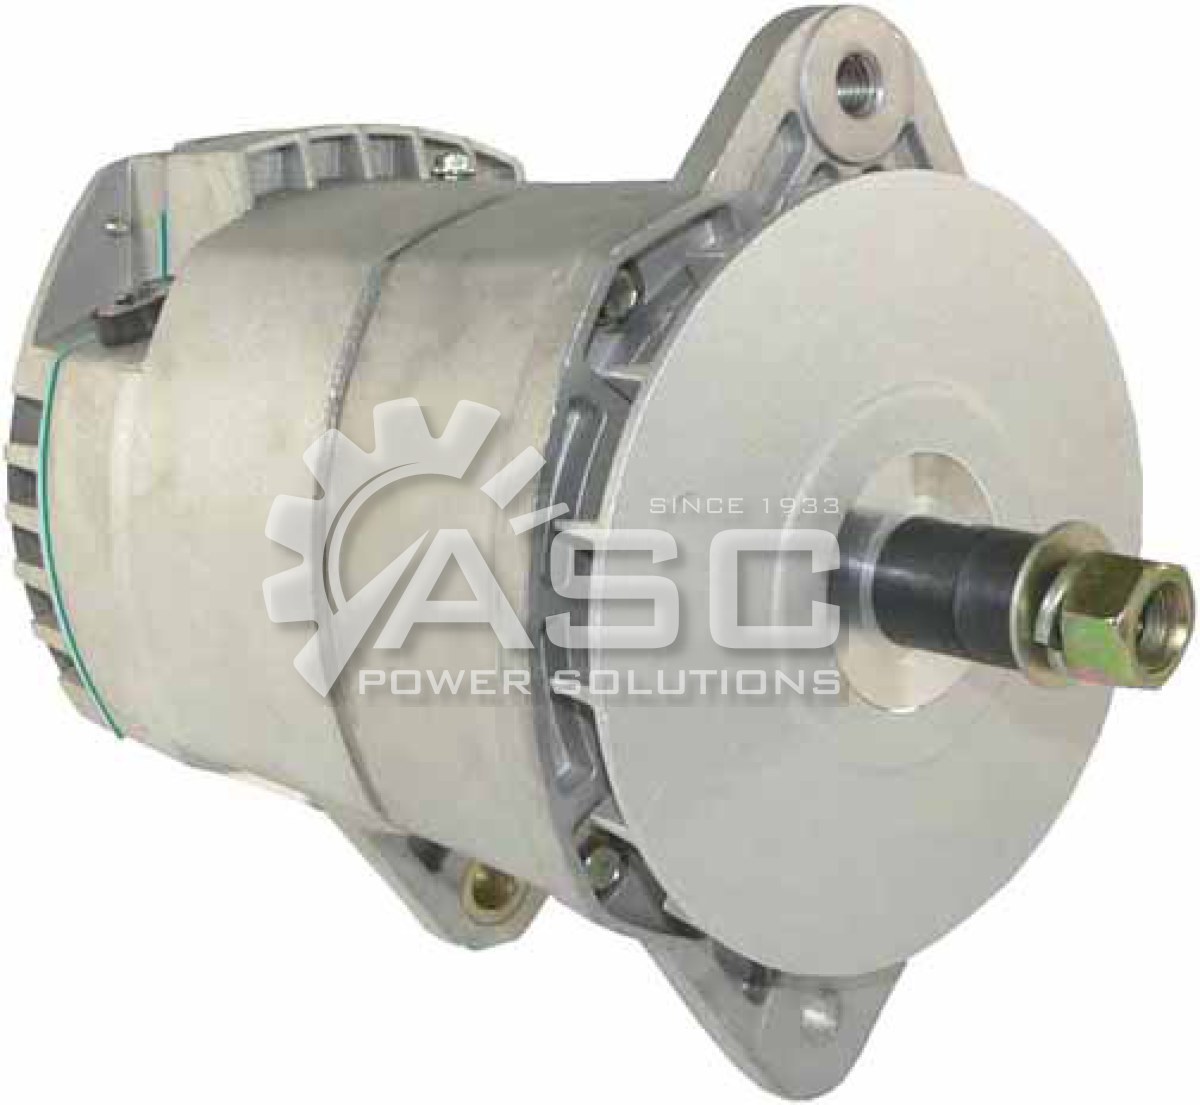 A121738_ASC POWER SOLUTIONS REMAN 25SI 12V 75AMP